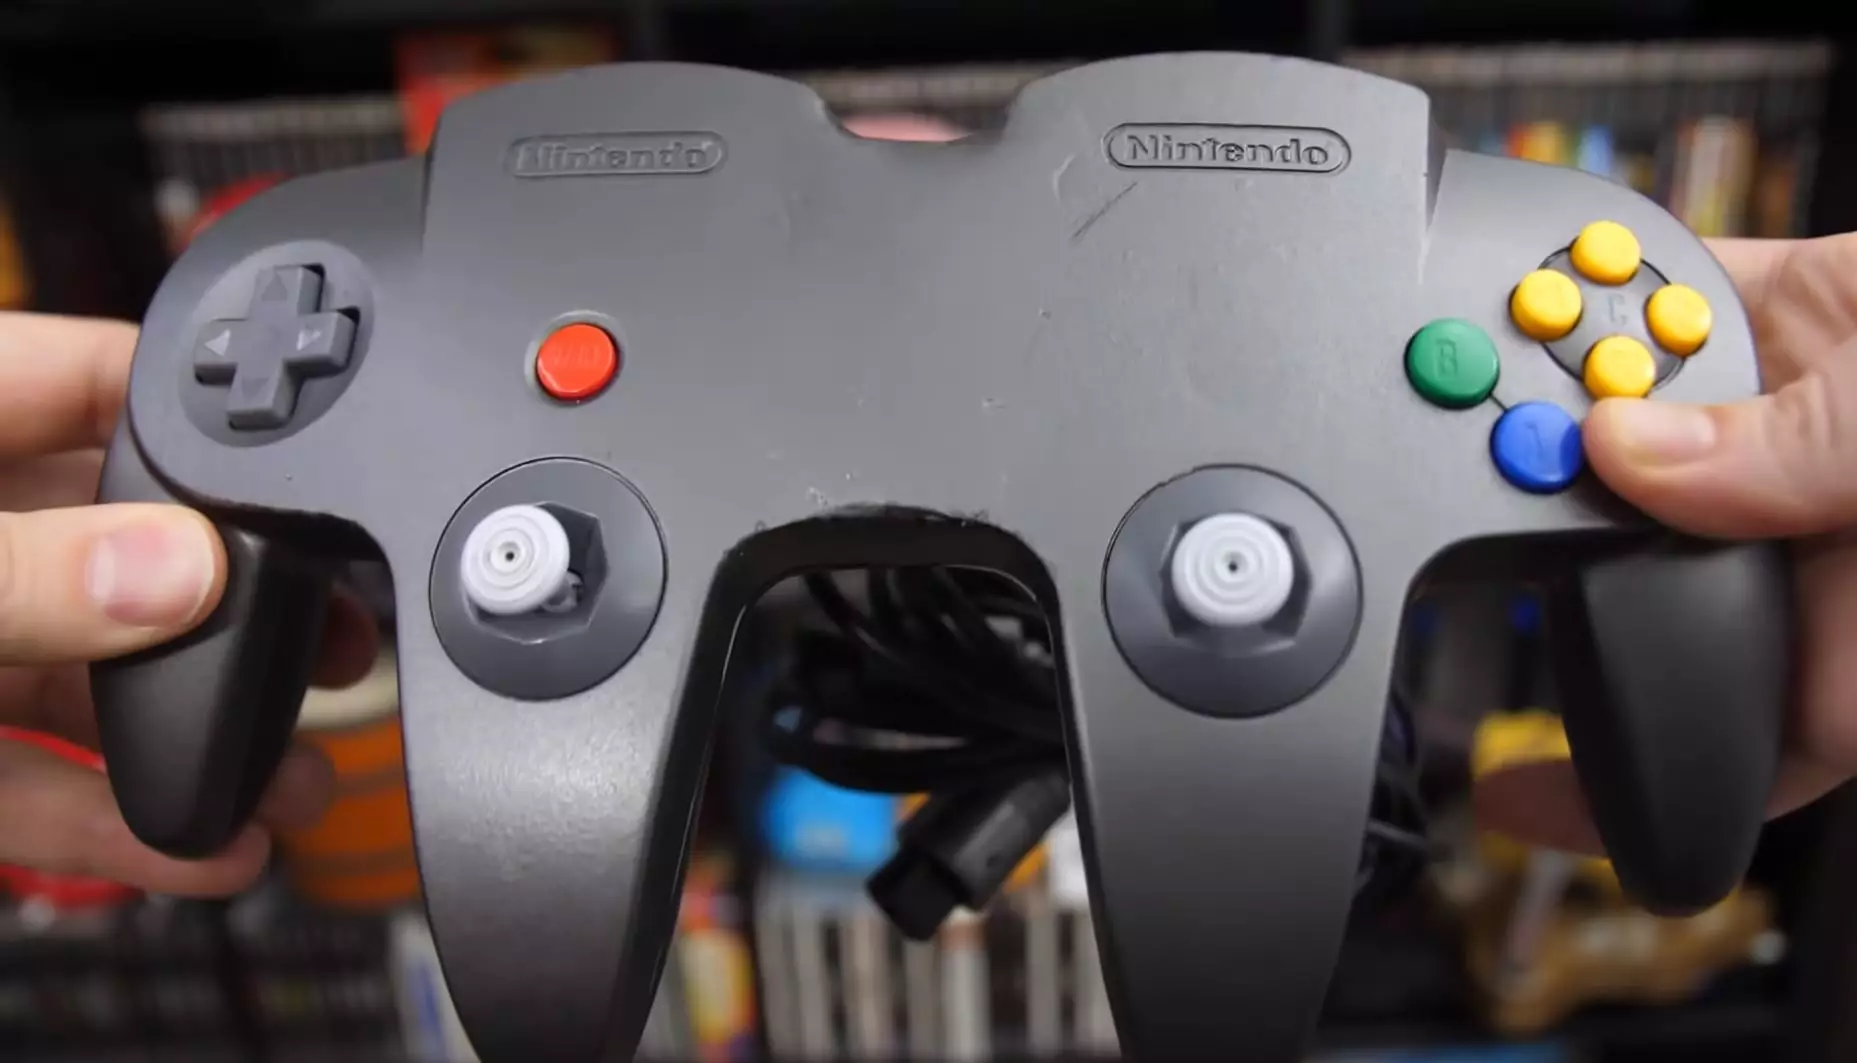 Stop Skeletons From Fighting holding the modded N64 controller